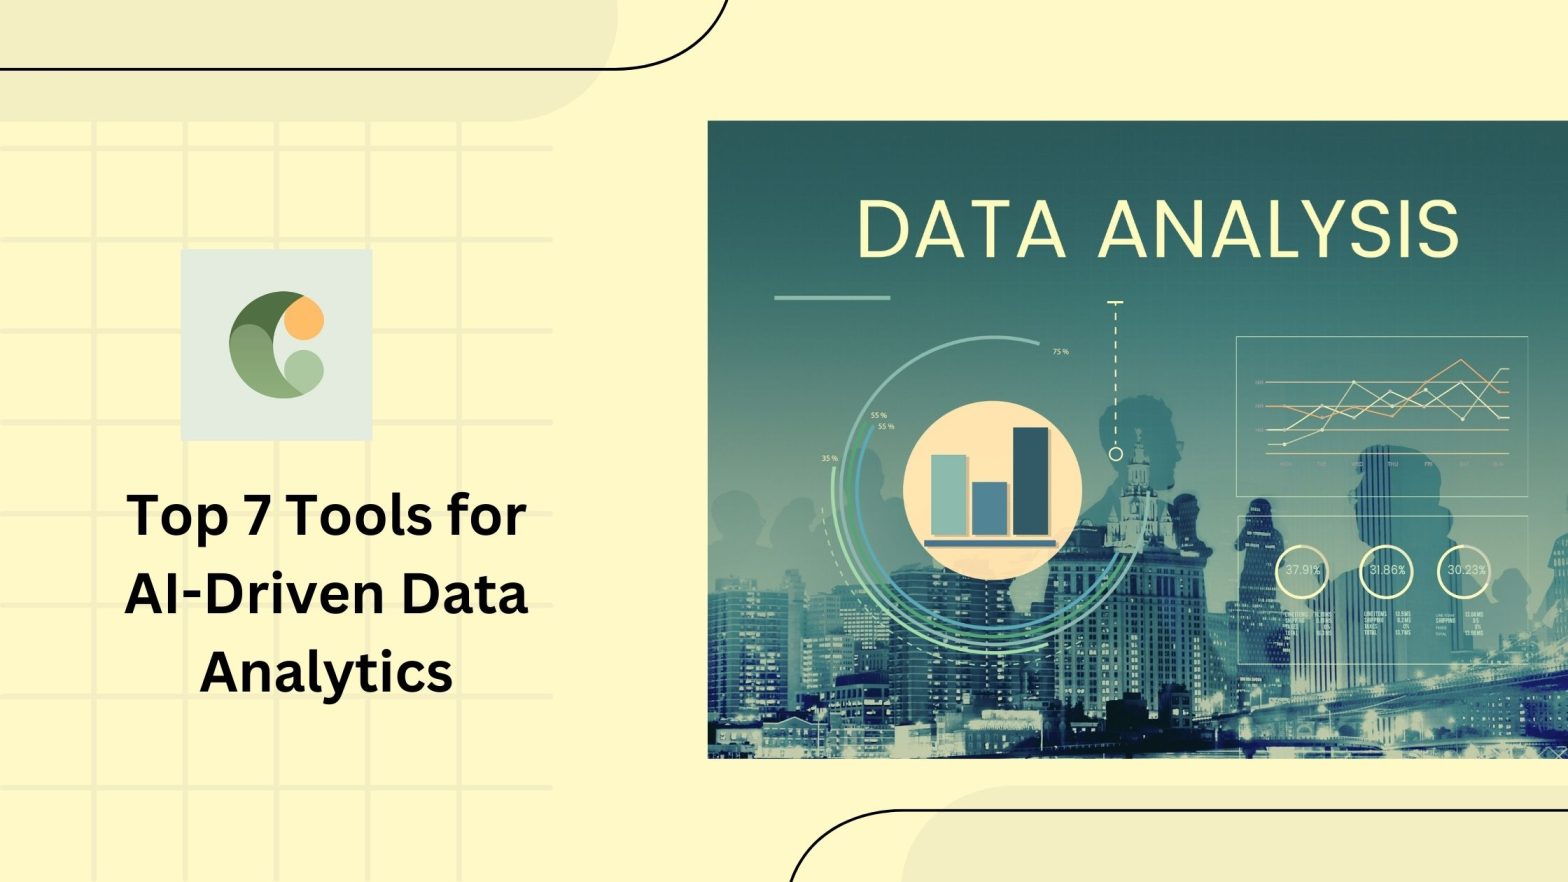 Top 7 Tools for AI-Driven Data Analytics